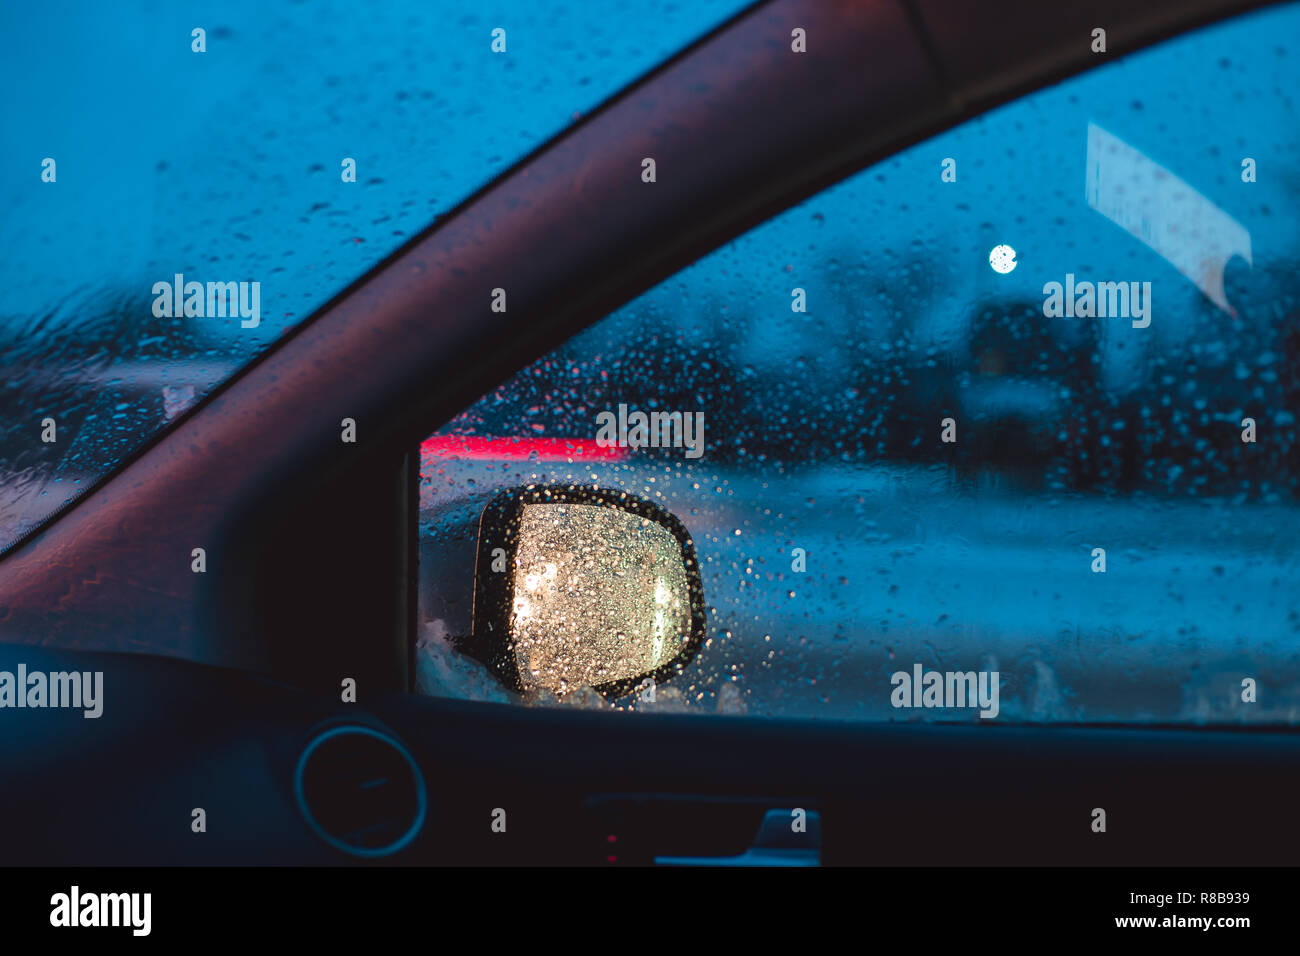 The light of car headlights is reflected in the side mirror of the car. Car traffic winter morning. Stock Photo